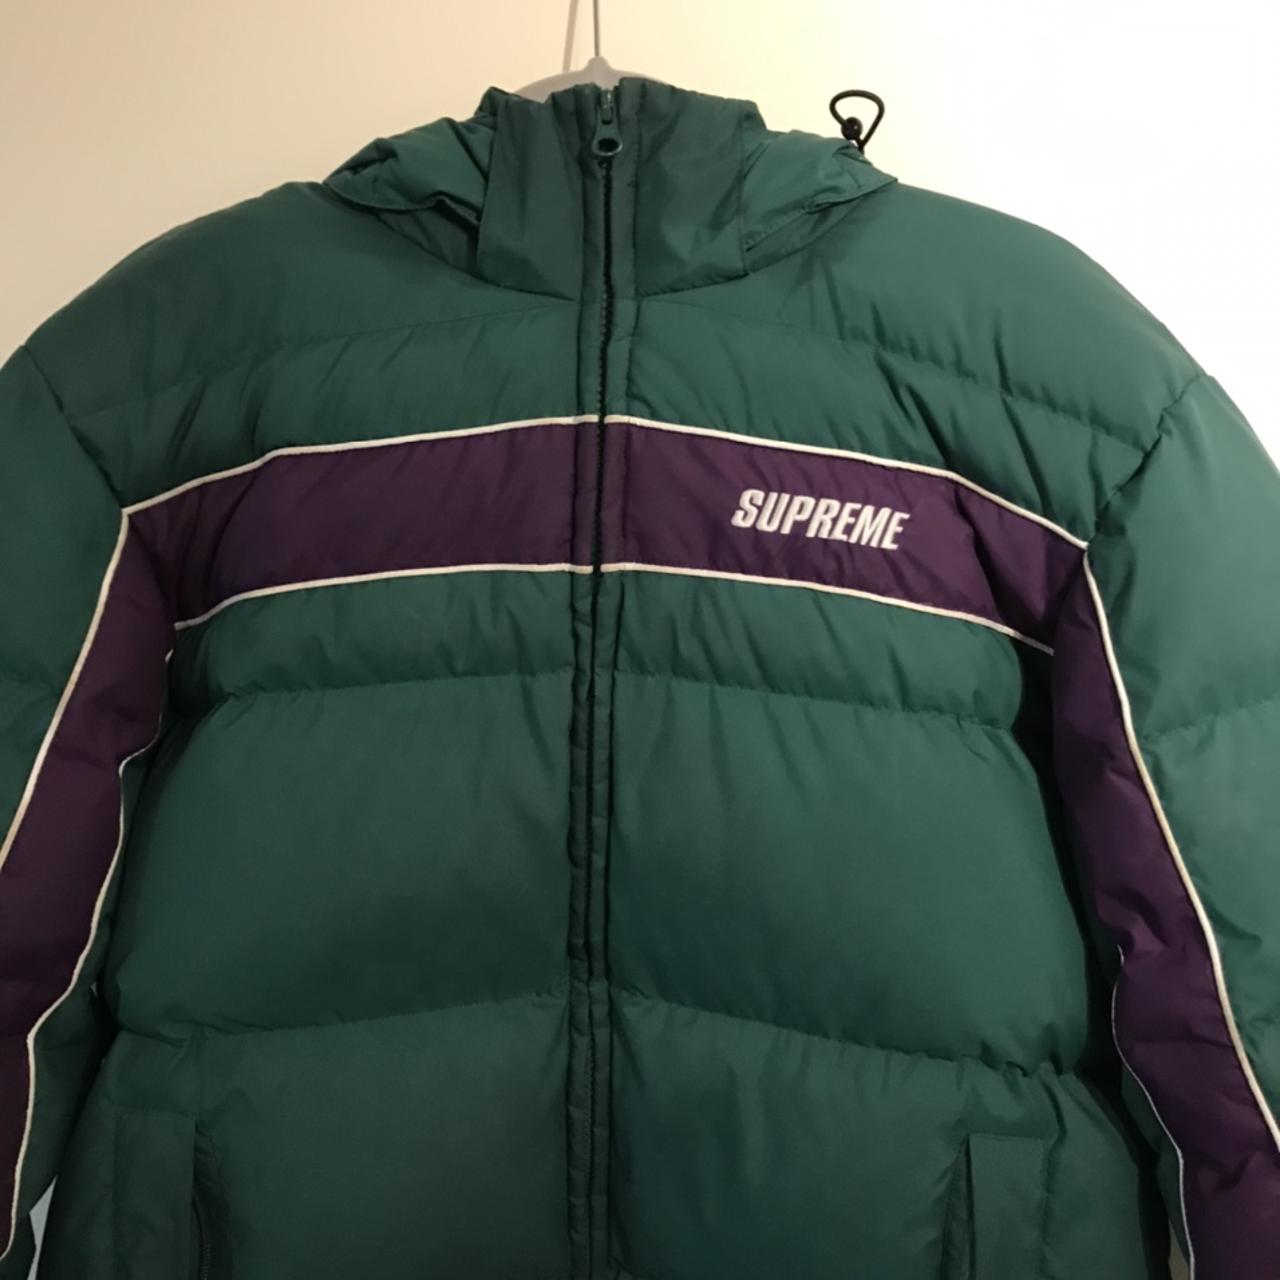 Supreme puffer jacket / coat in green and... - Depop